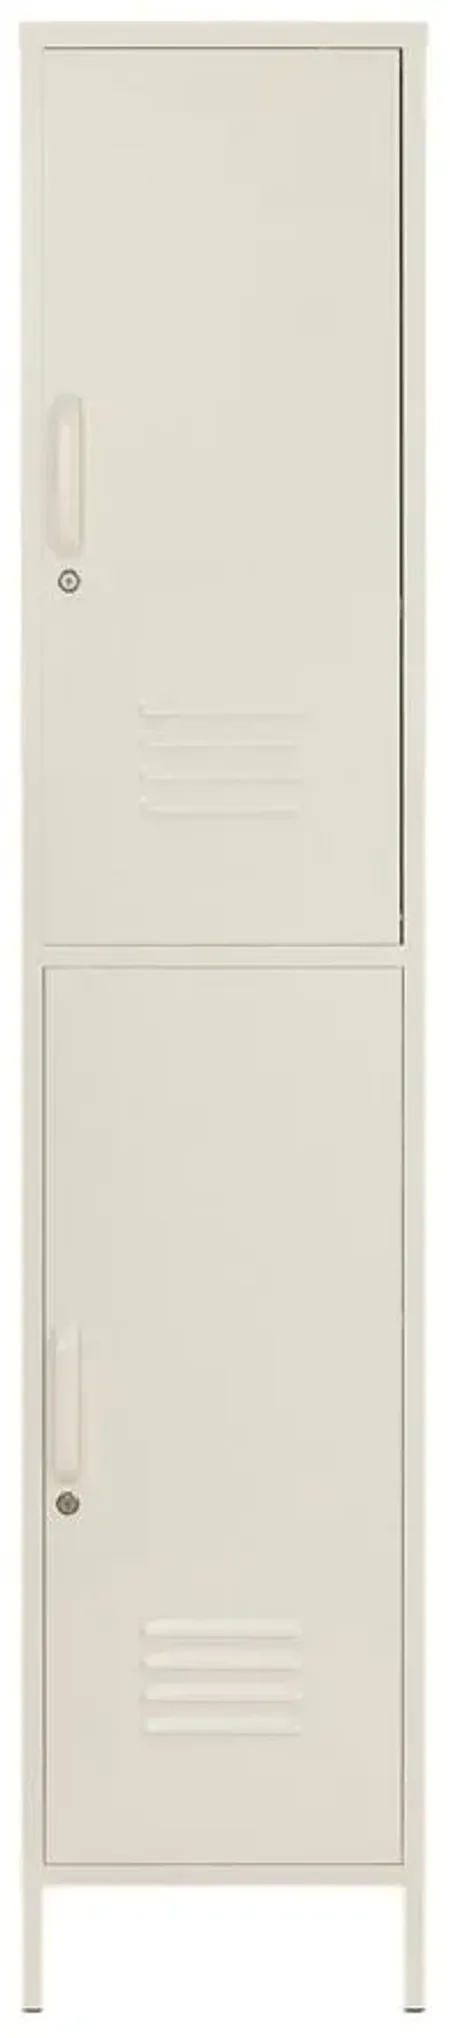 Mission District Metal Tall Locker Cabinet in White by DOREL HOME FURNISHINGS